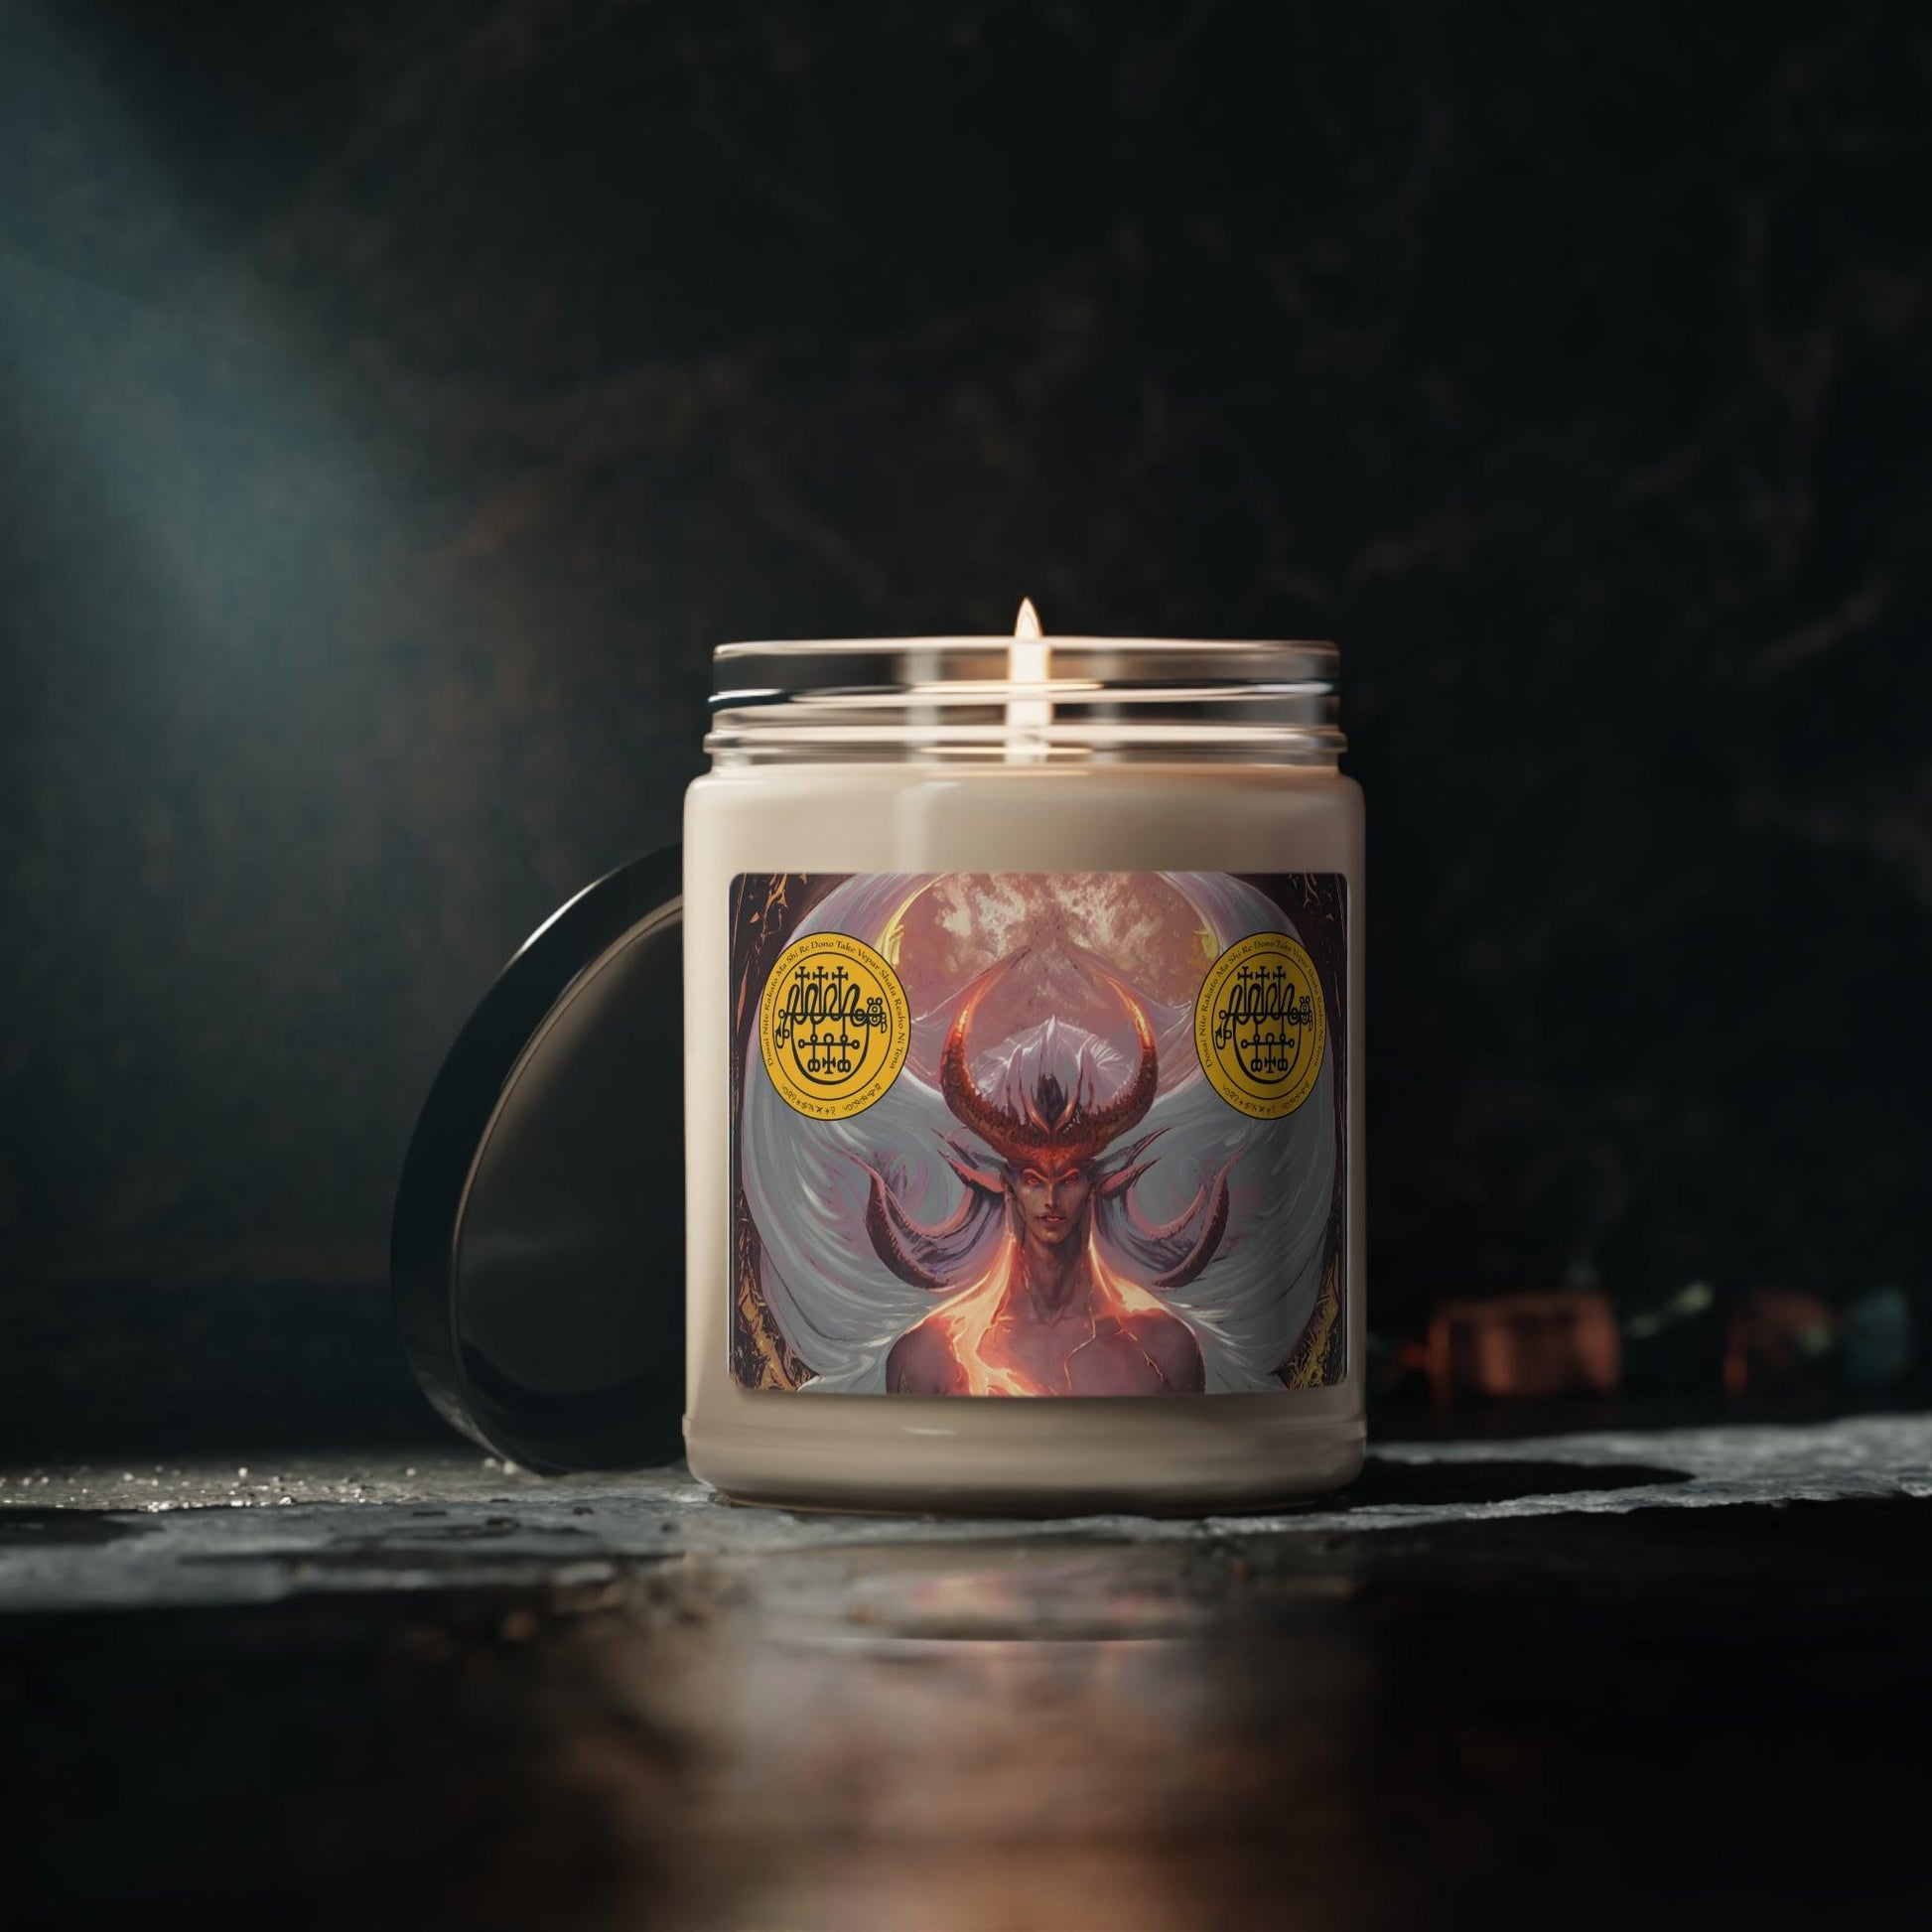 Demon-Vepar-Altar-Scented-Soy-Candle-for-offerings-rituals-initiations-o-praying-and-medtation-10